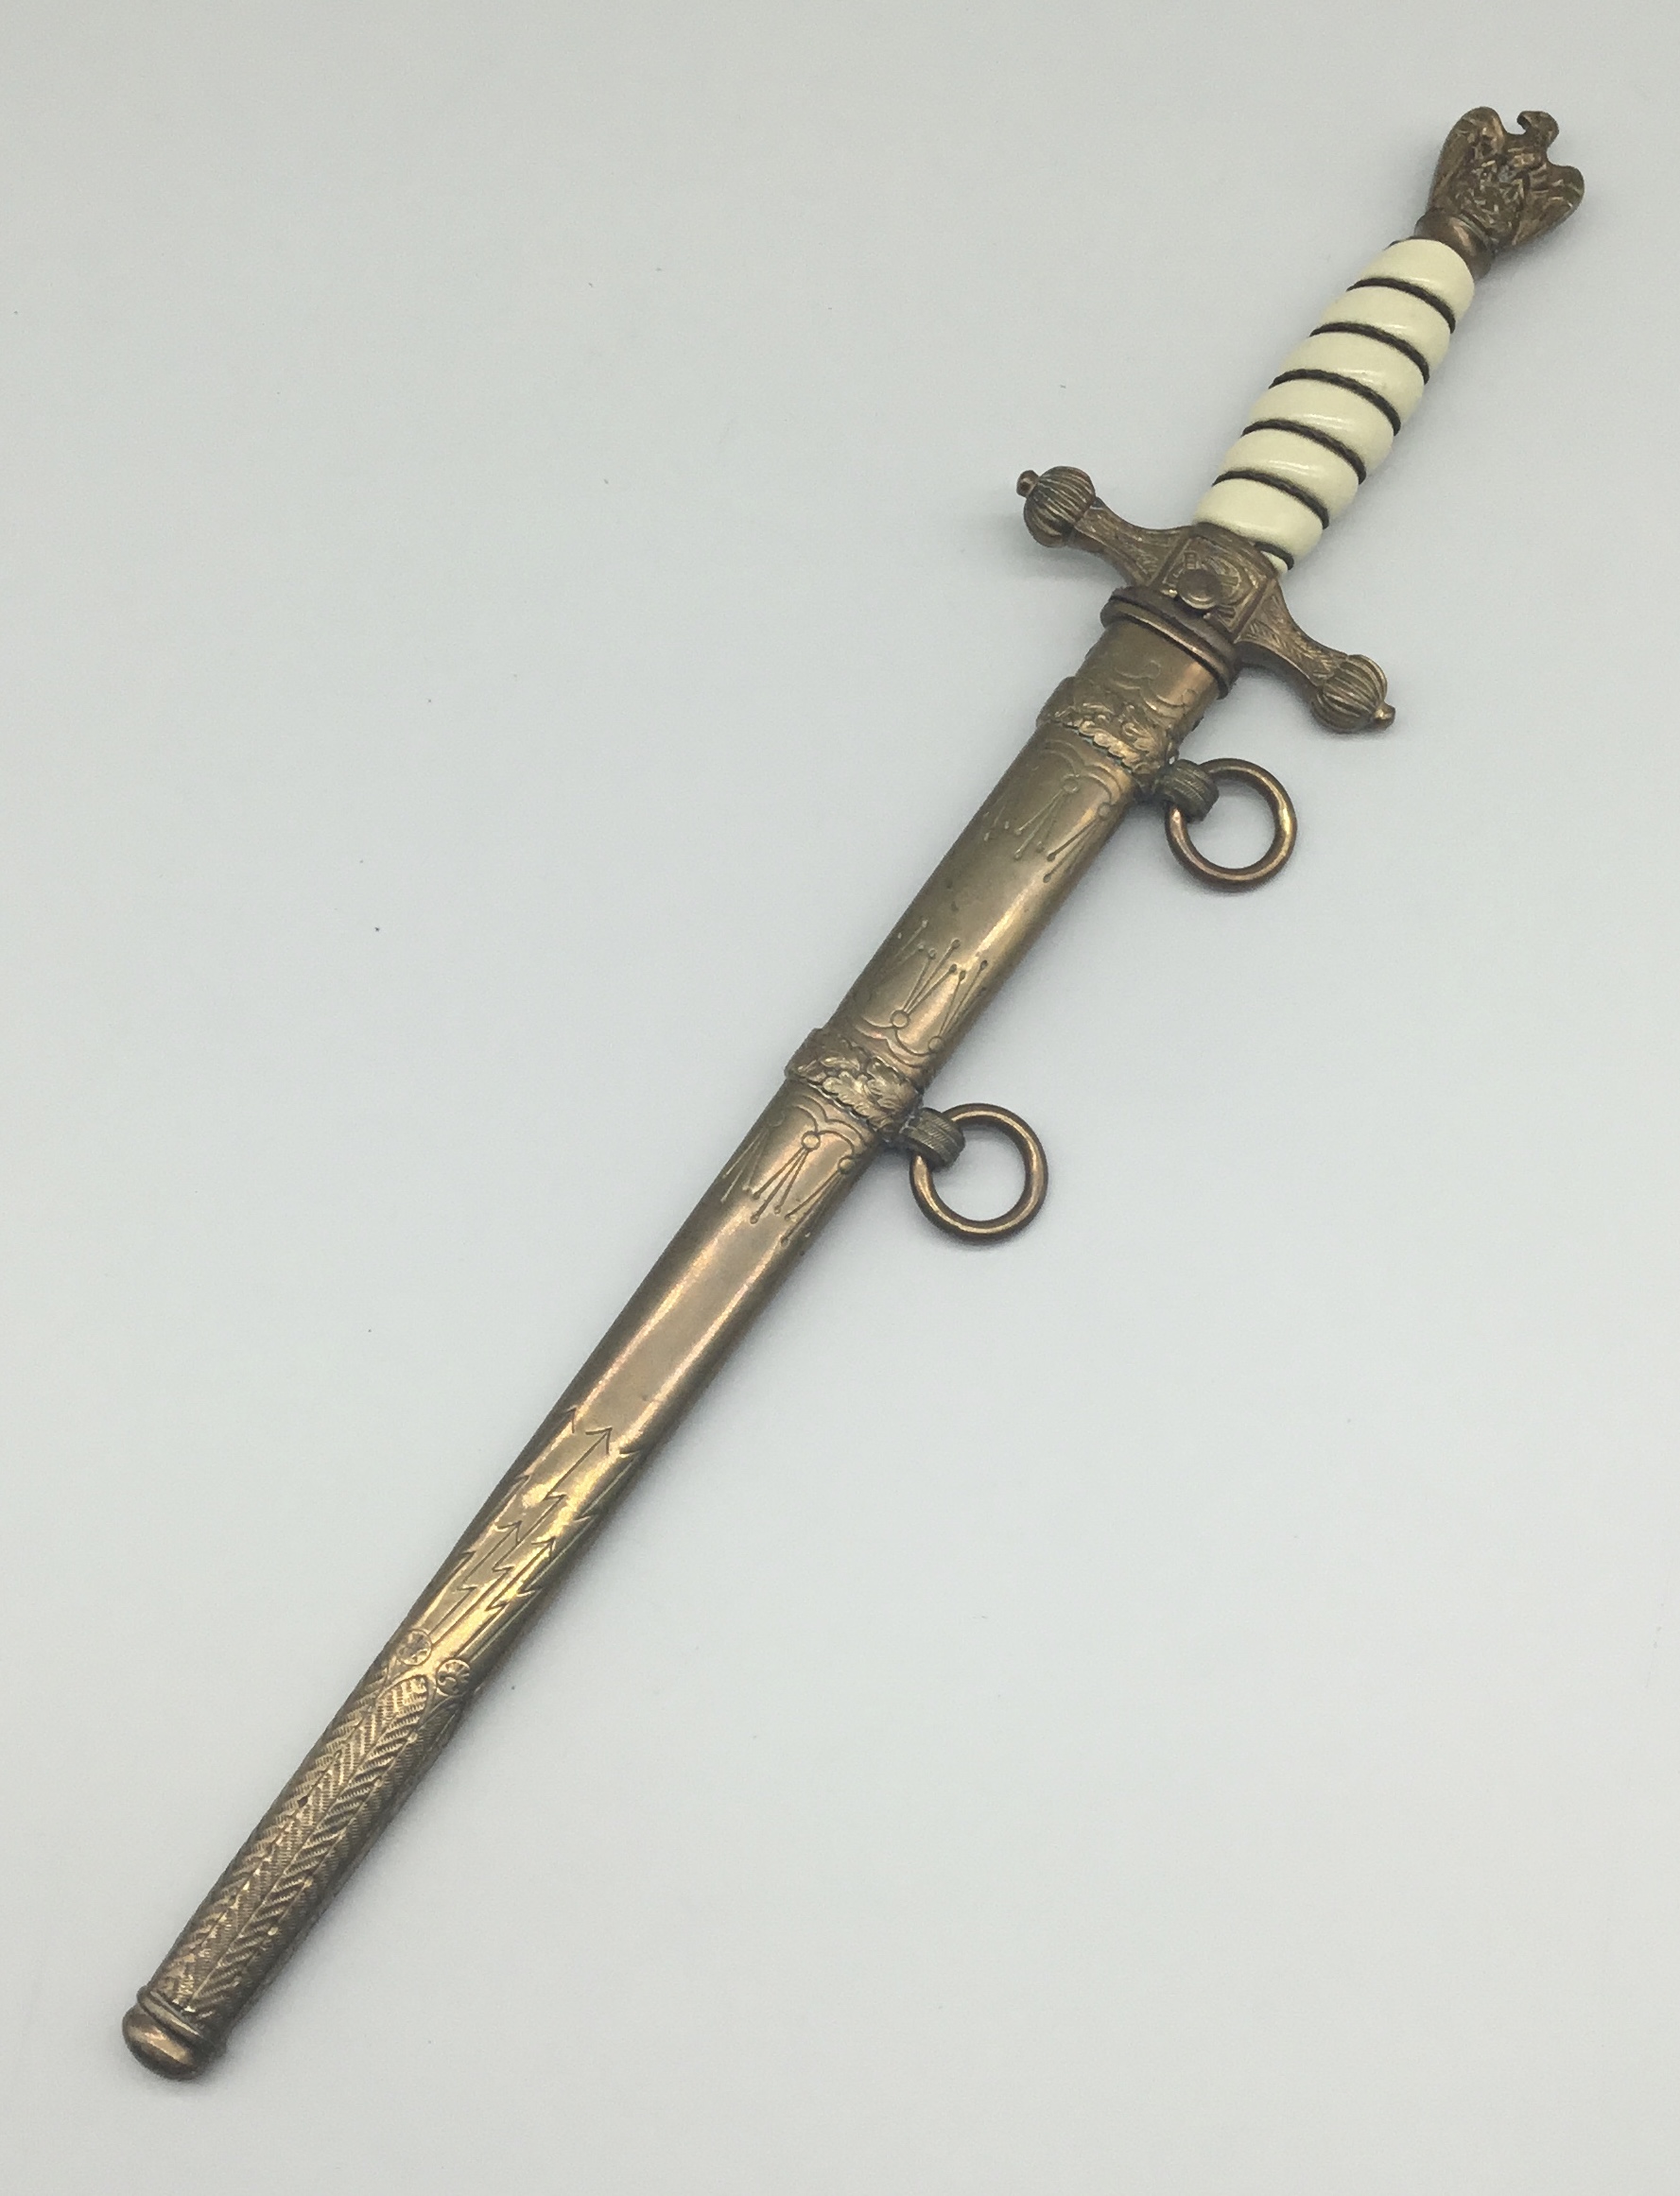 A WW2 German Kriegsmarine officer's dagger, by F.W.Holler, Solingen. Off white / ivory coloured